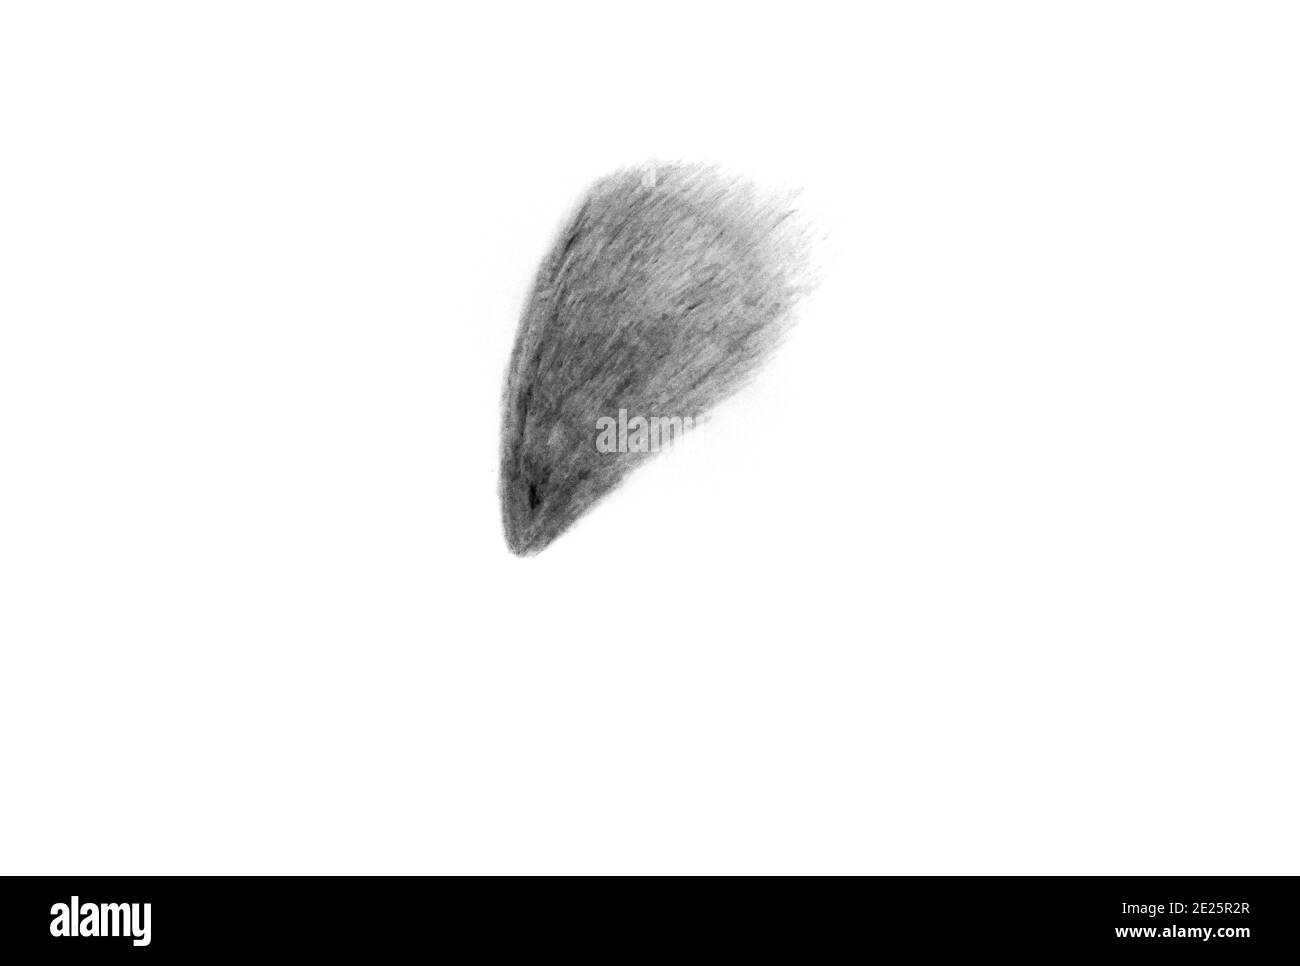 Cape Town South Africa - 13-08-2019 Graphite Sketch Illustration. Falling comet that looks similar to a seashell. Stock Photo